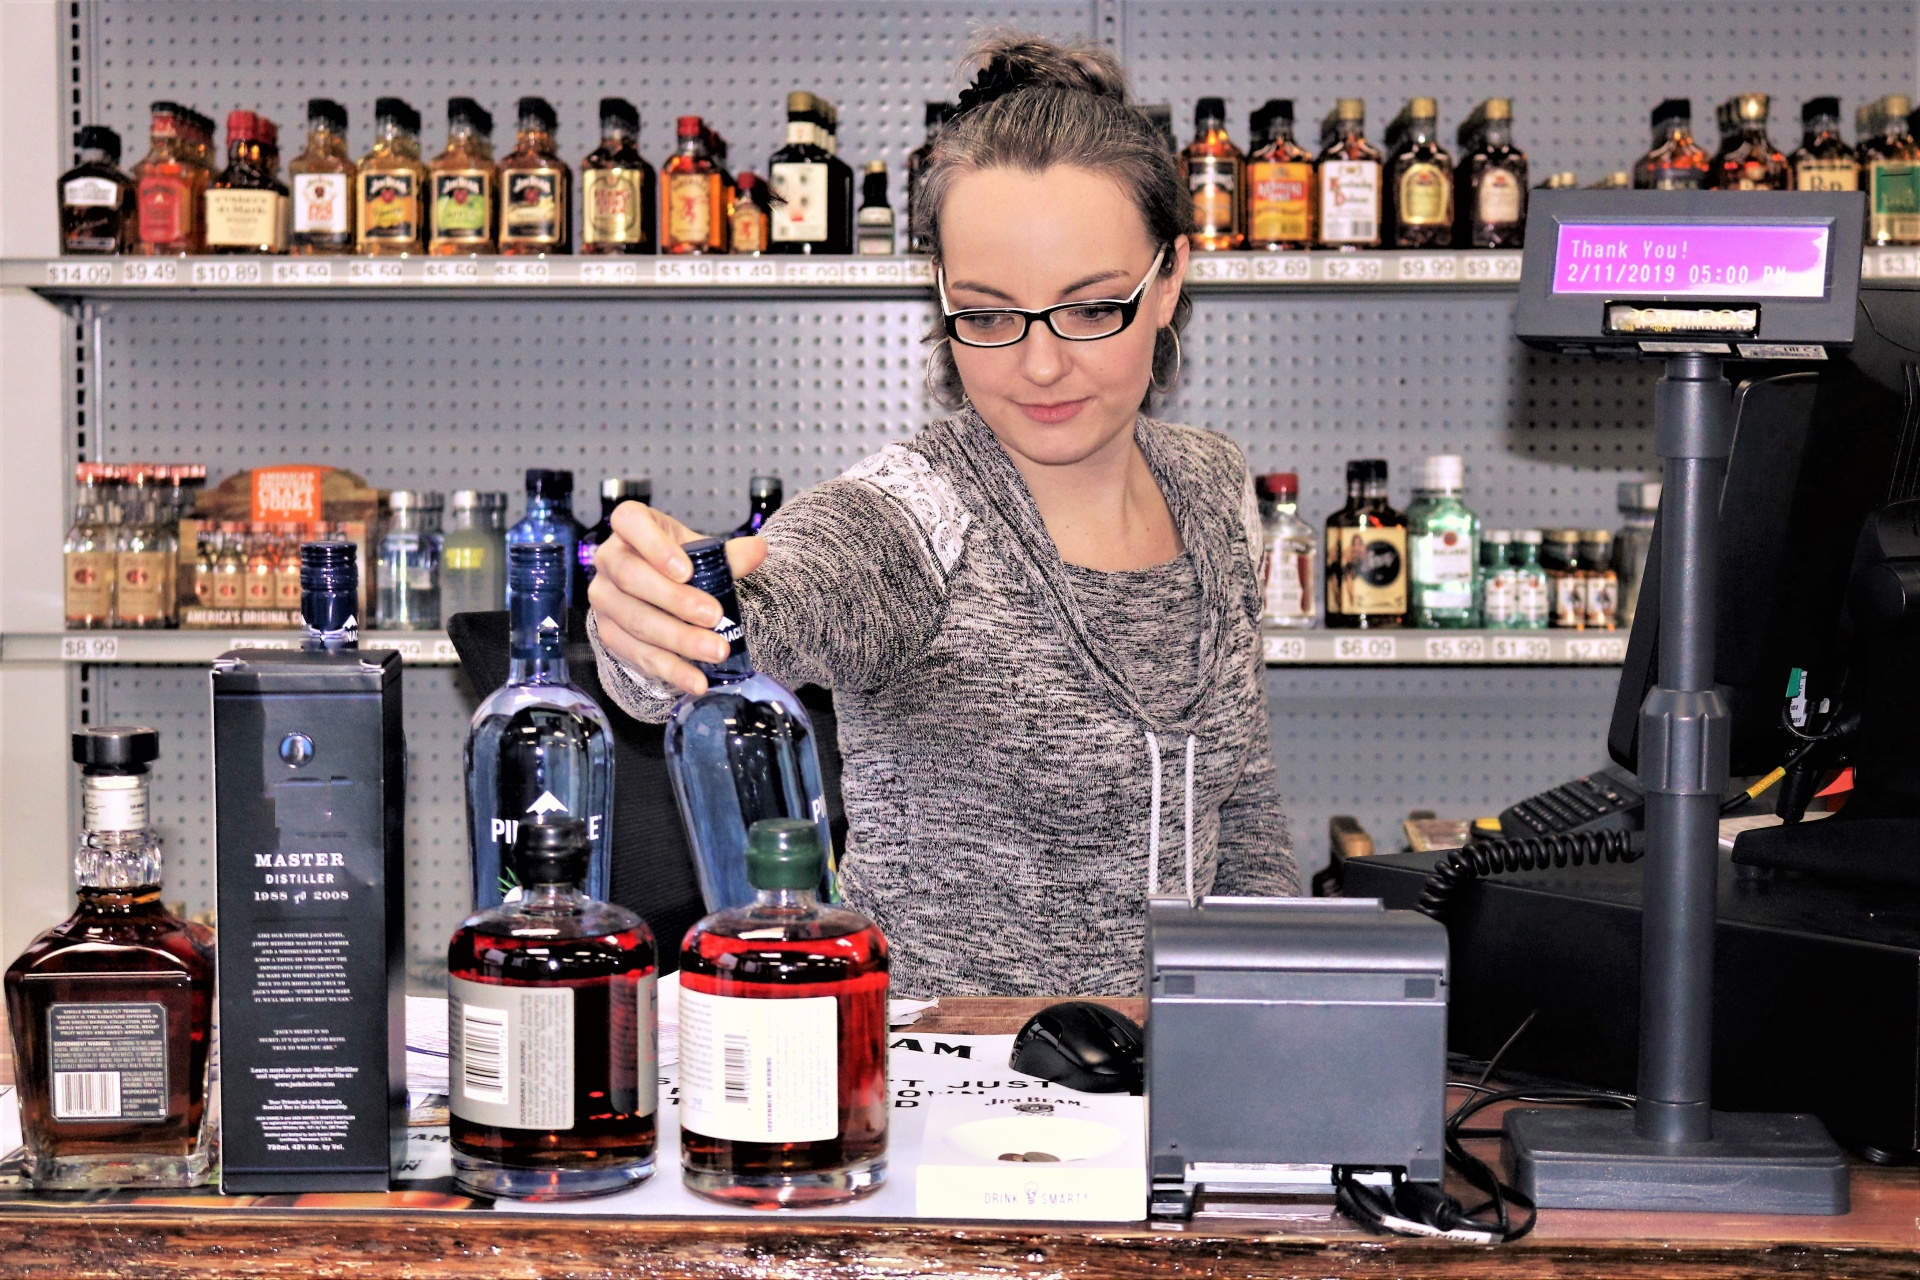 A pretty woman working behind a cash register at a liquor store.